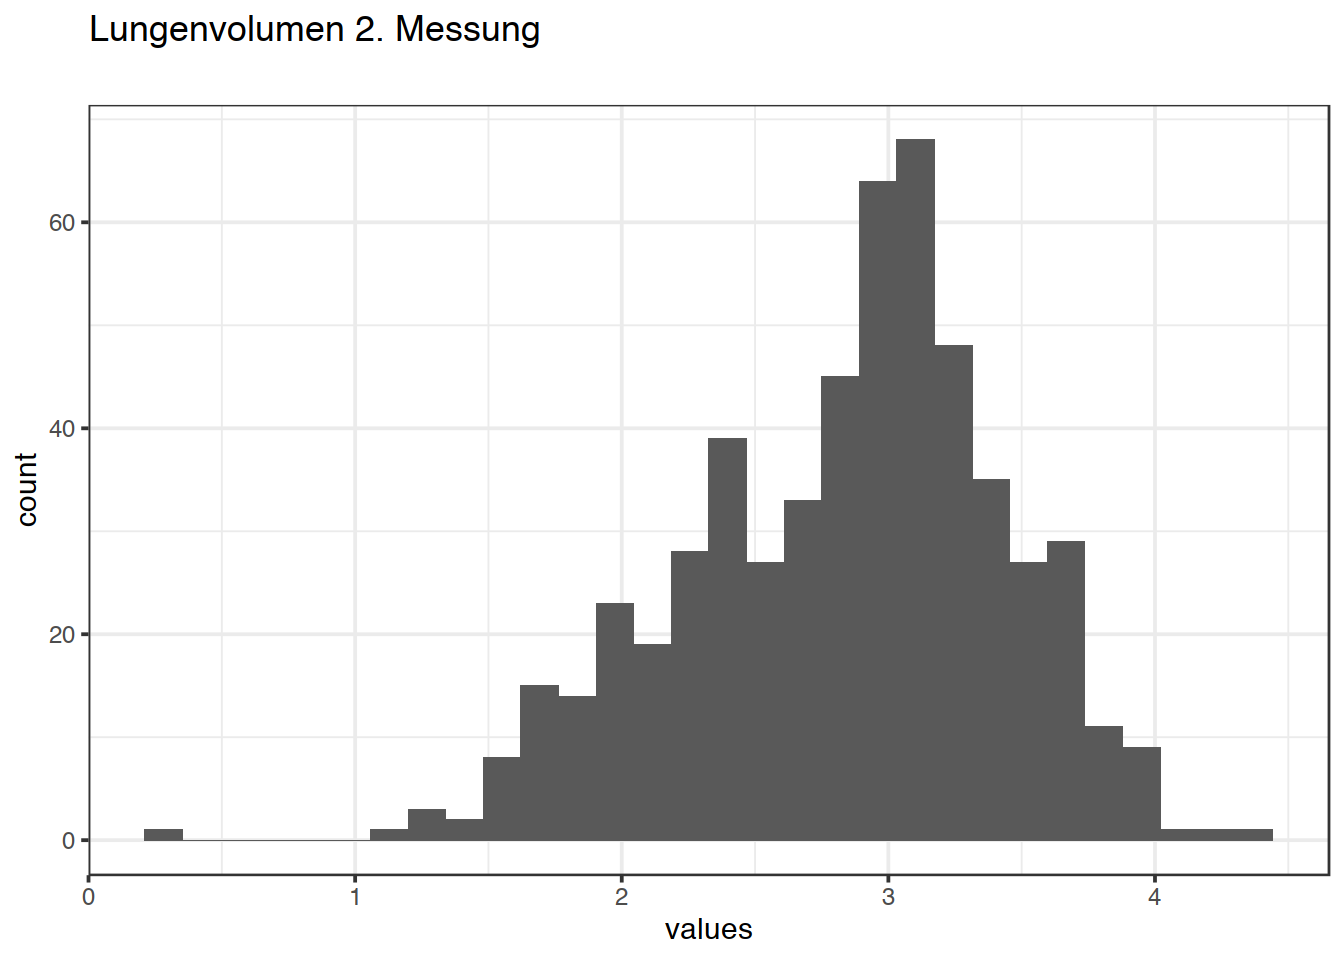 Distribution of values for Lungenvolumen 2. Messung